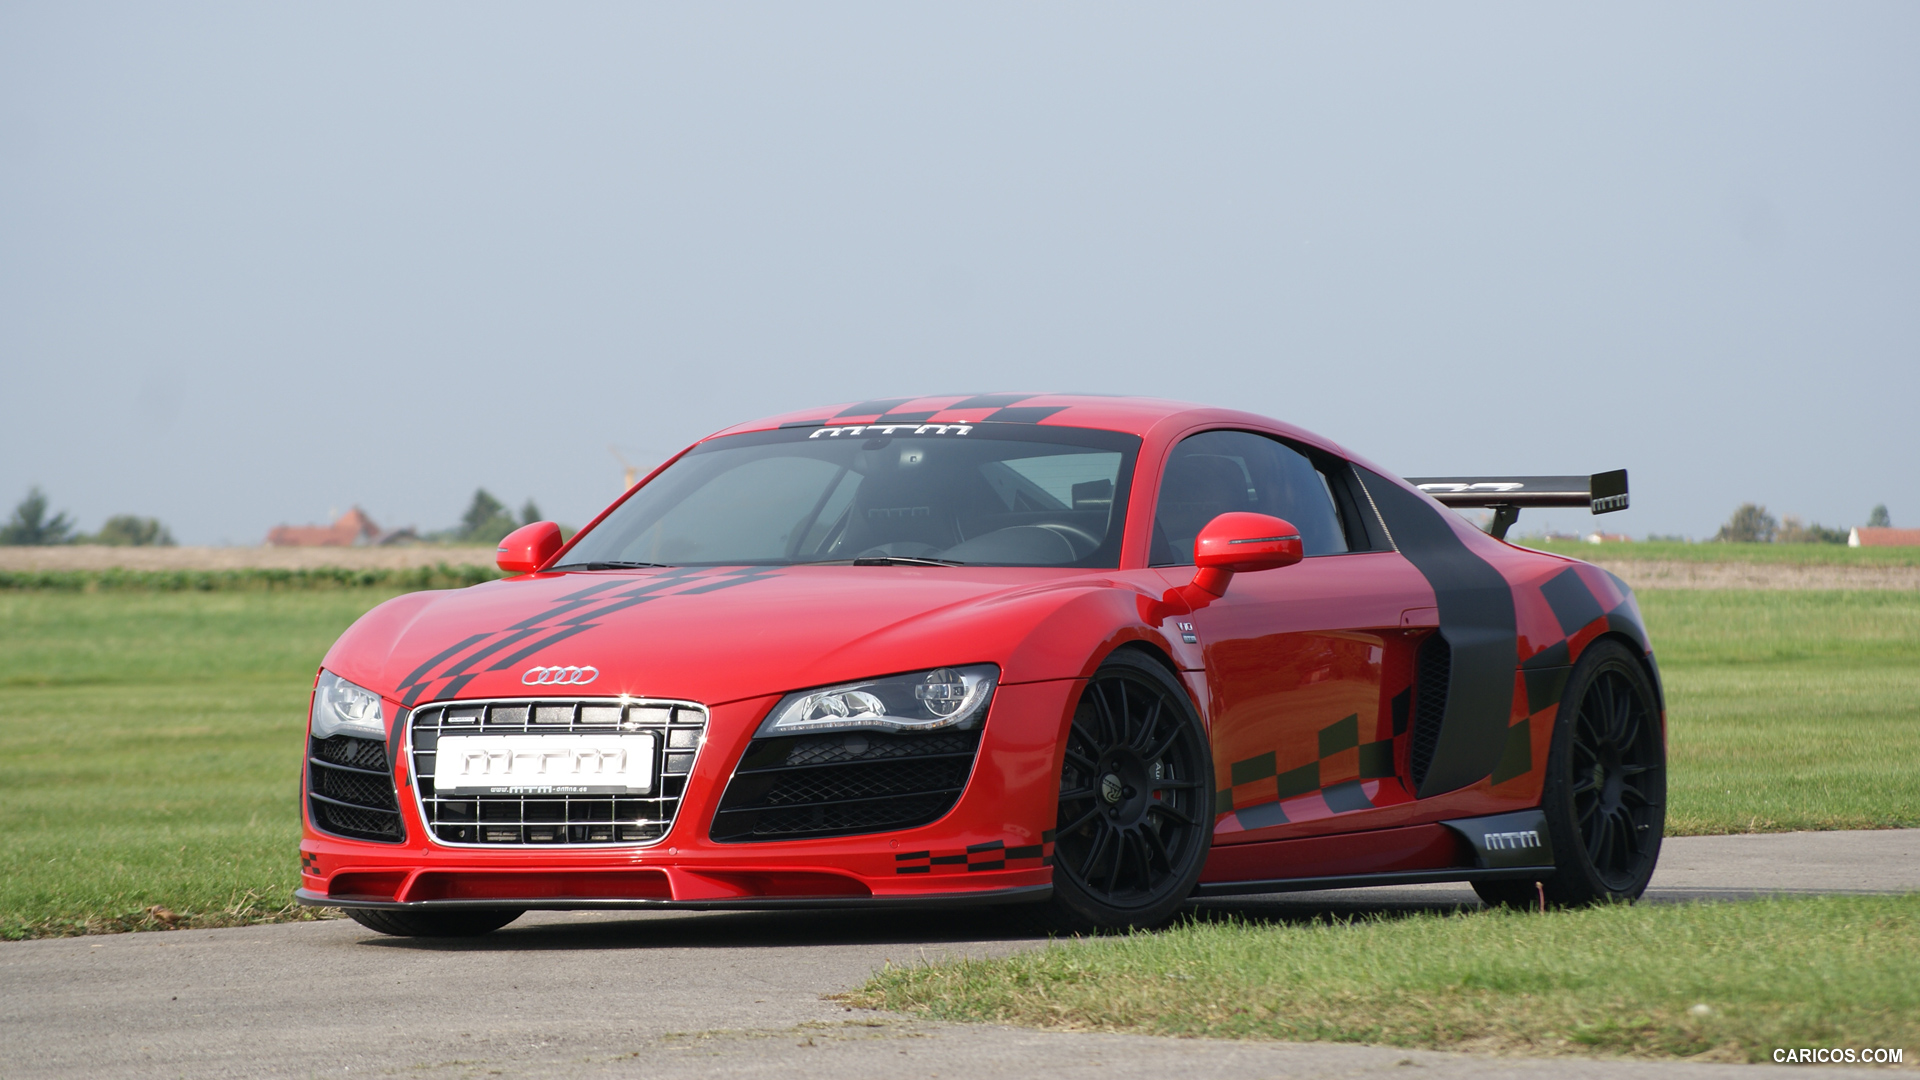 MTM Audi R8 V10 (2013) Coupe - Front, #15 of 21